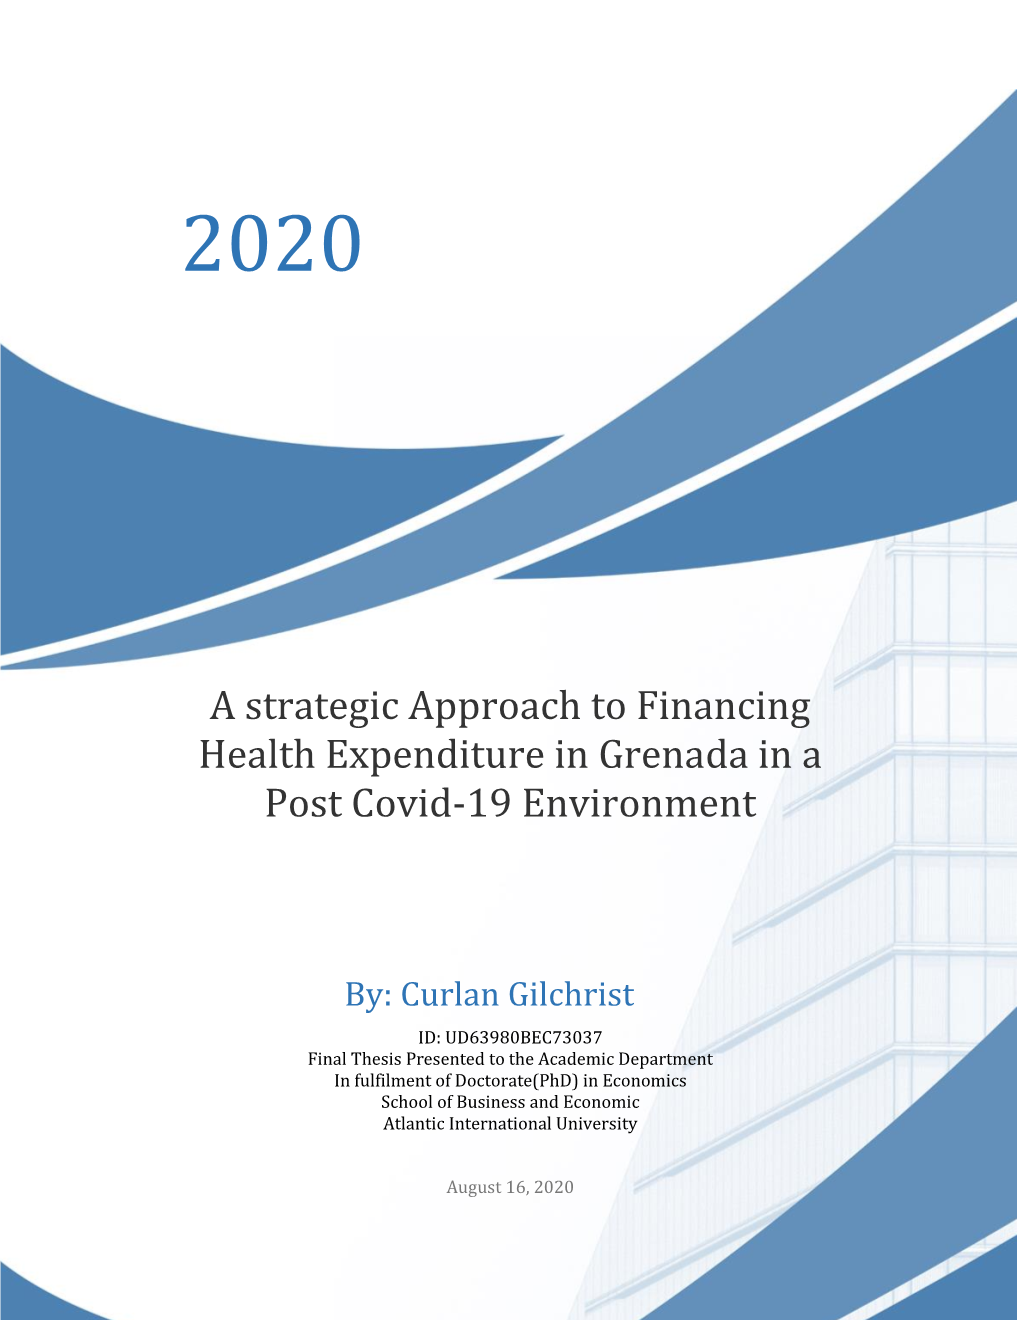 A Strategic Approach to Financing Health Expenditure in Grenada in A